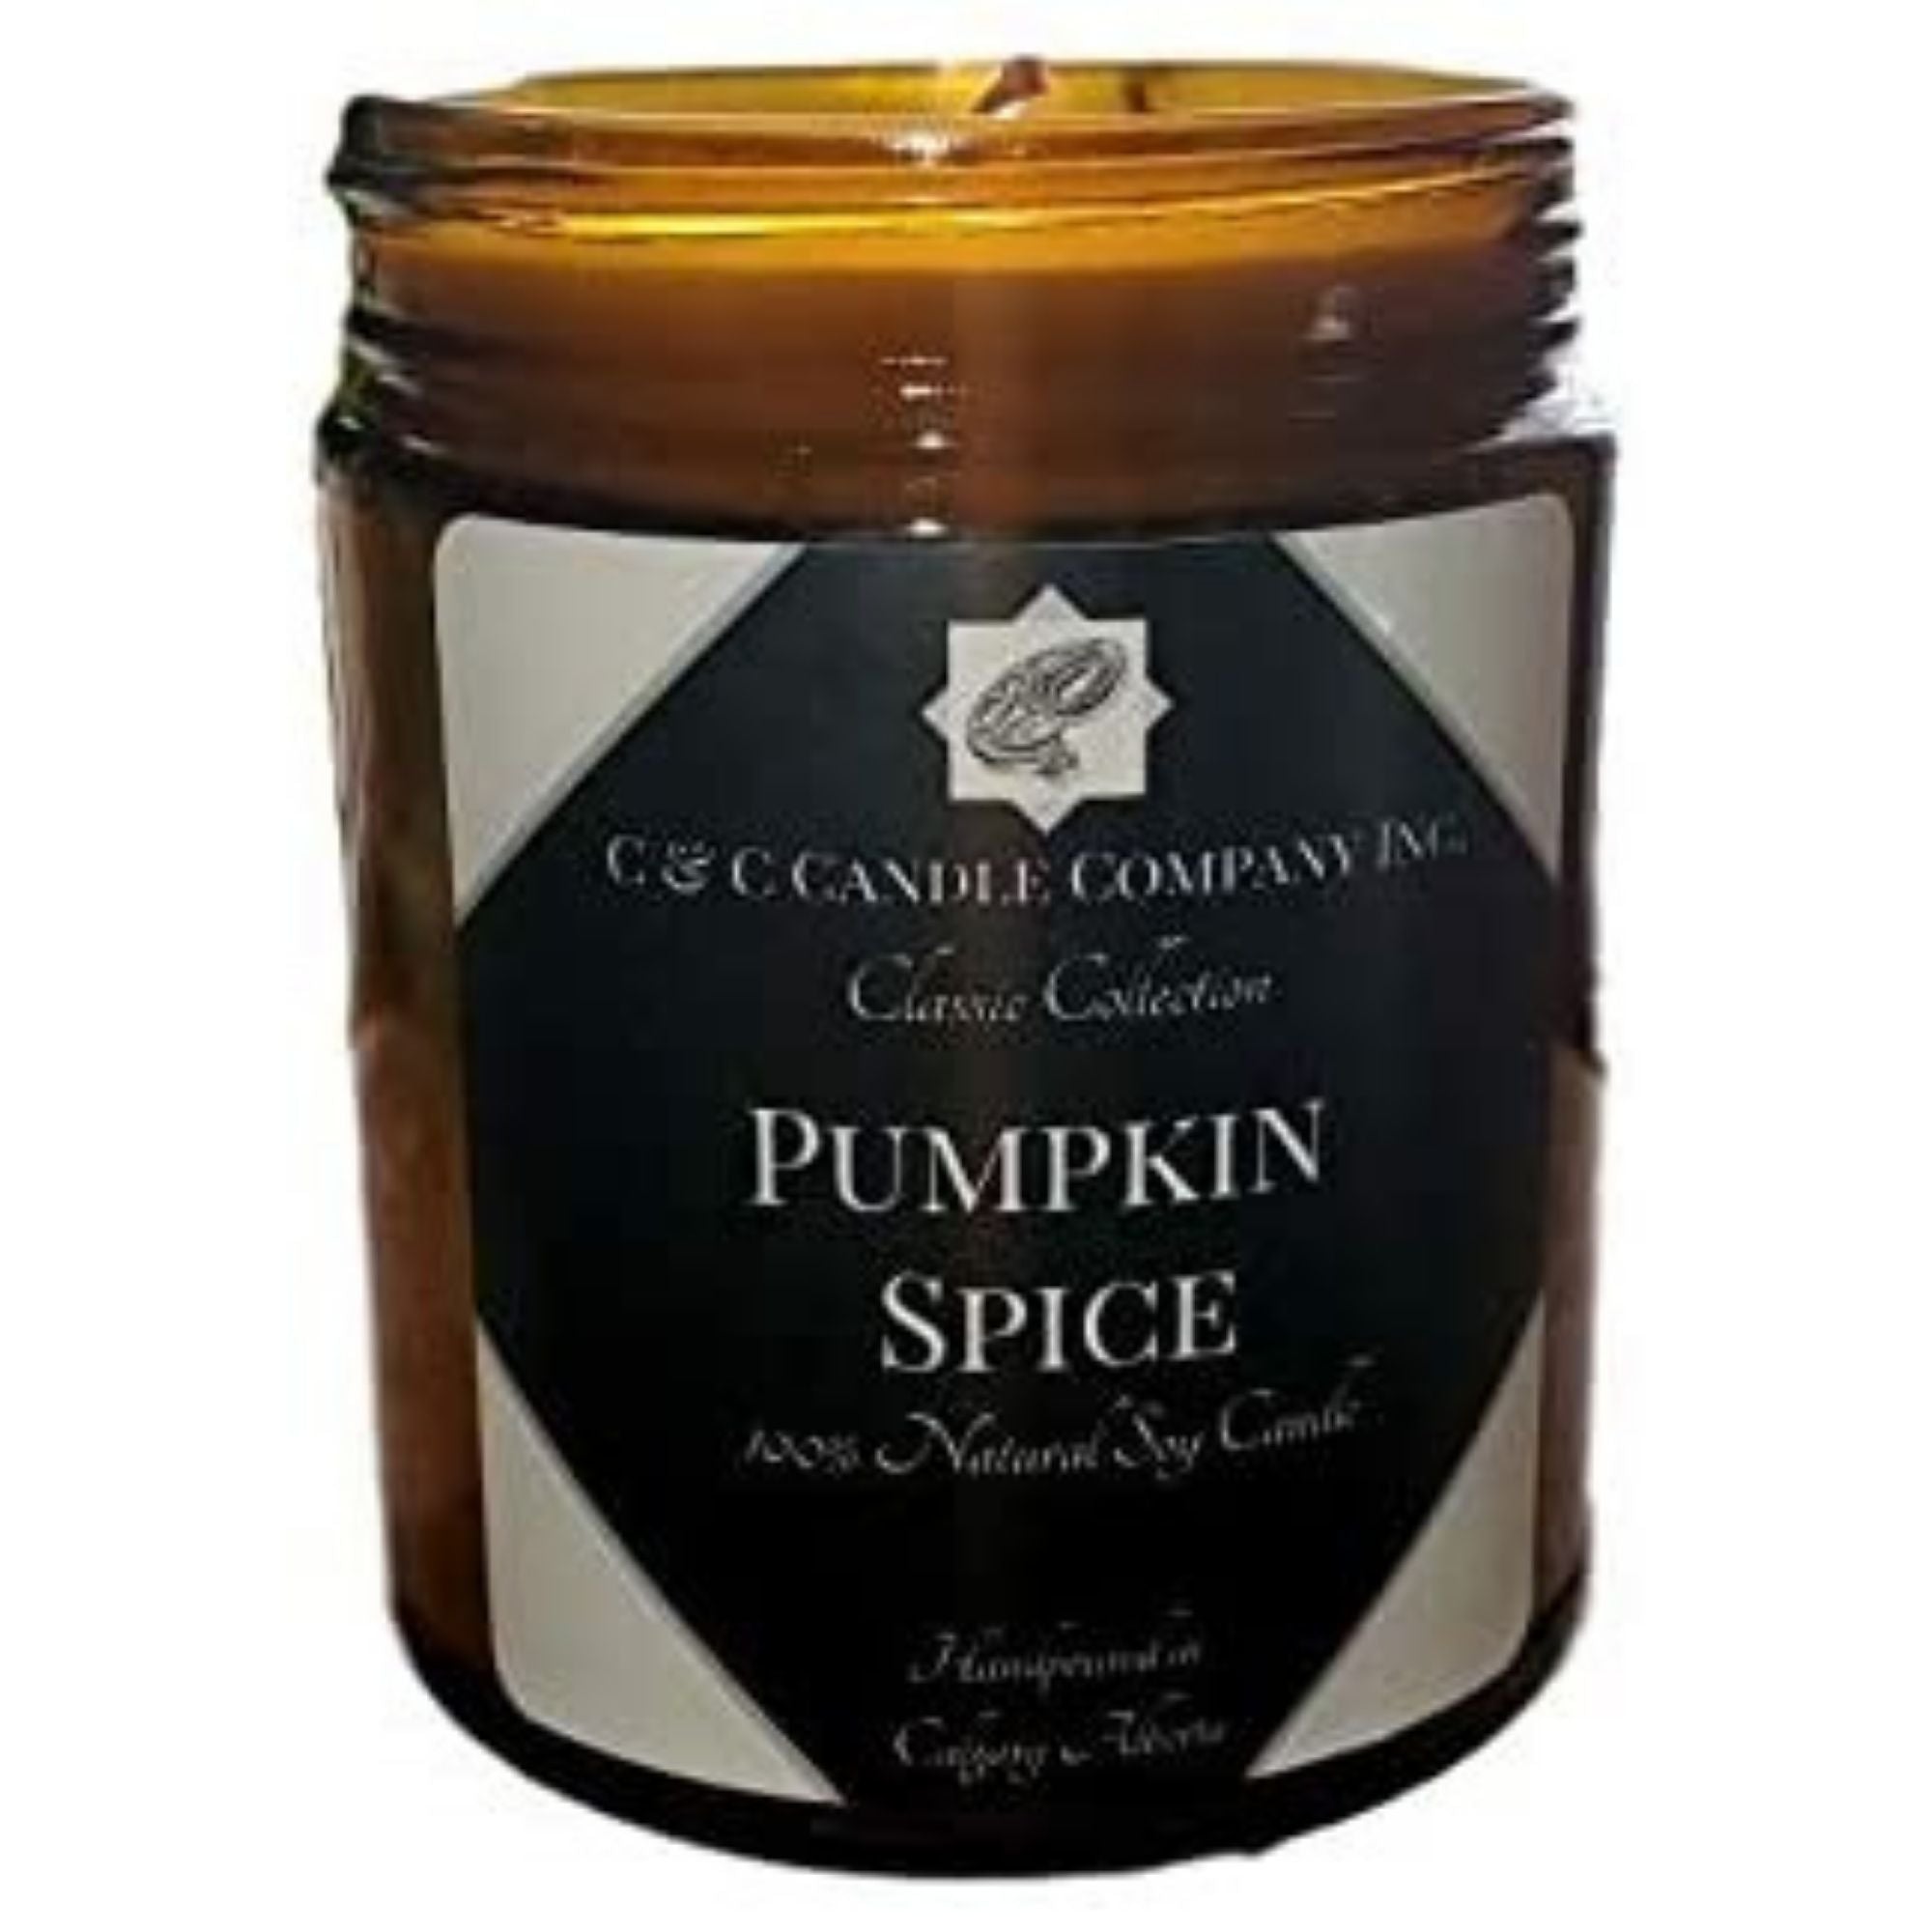 Luxury Aromatherapy Classic Collection Candles 9 oz/ 71-80h Burning time, Canadian Made - Hand Poured by C & C Candle Company Inc.